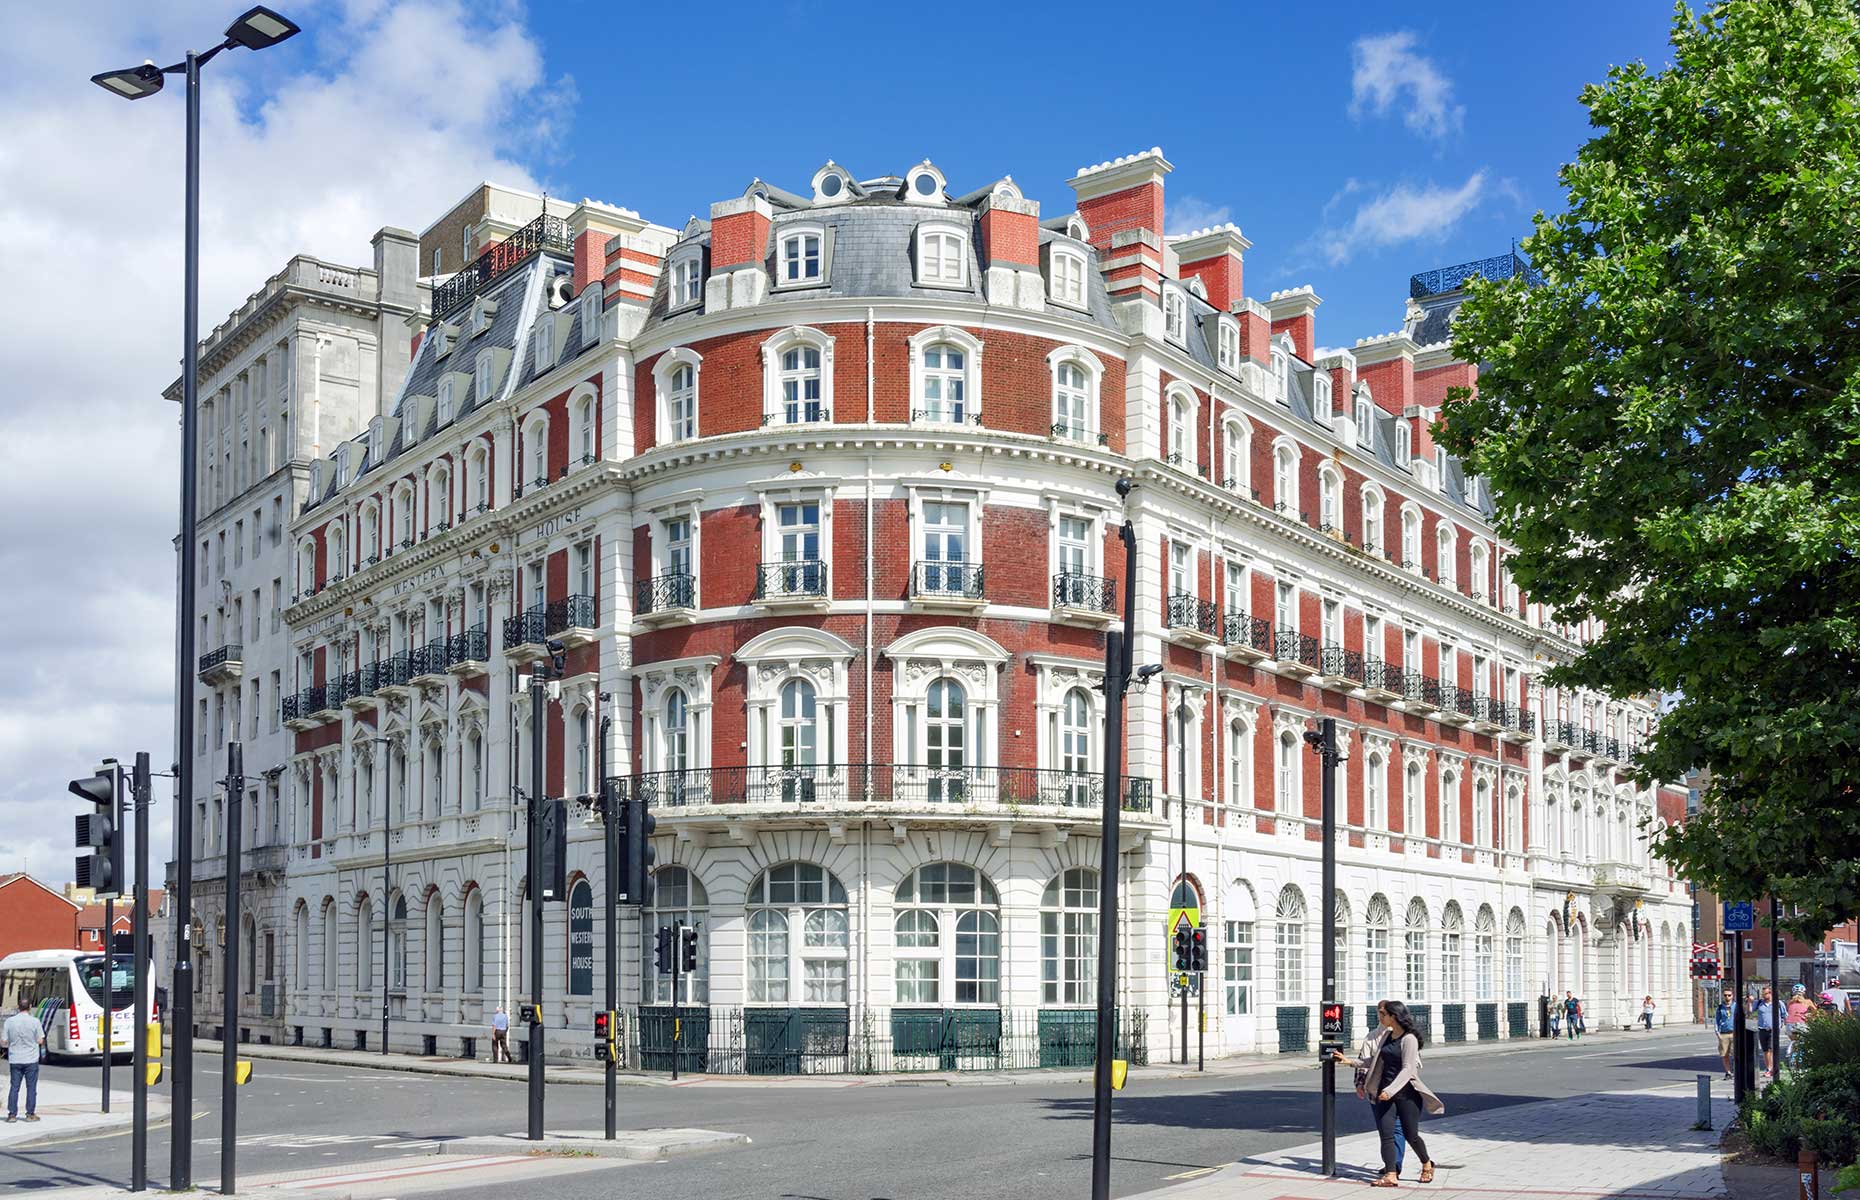 South Western House, part of the Southampton's Titanic trail (Image: Sterling Images/Shutterstock)